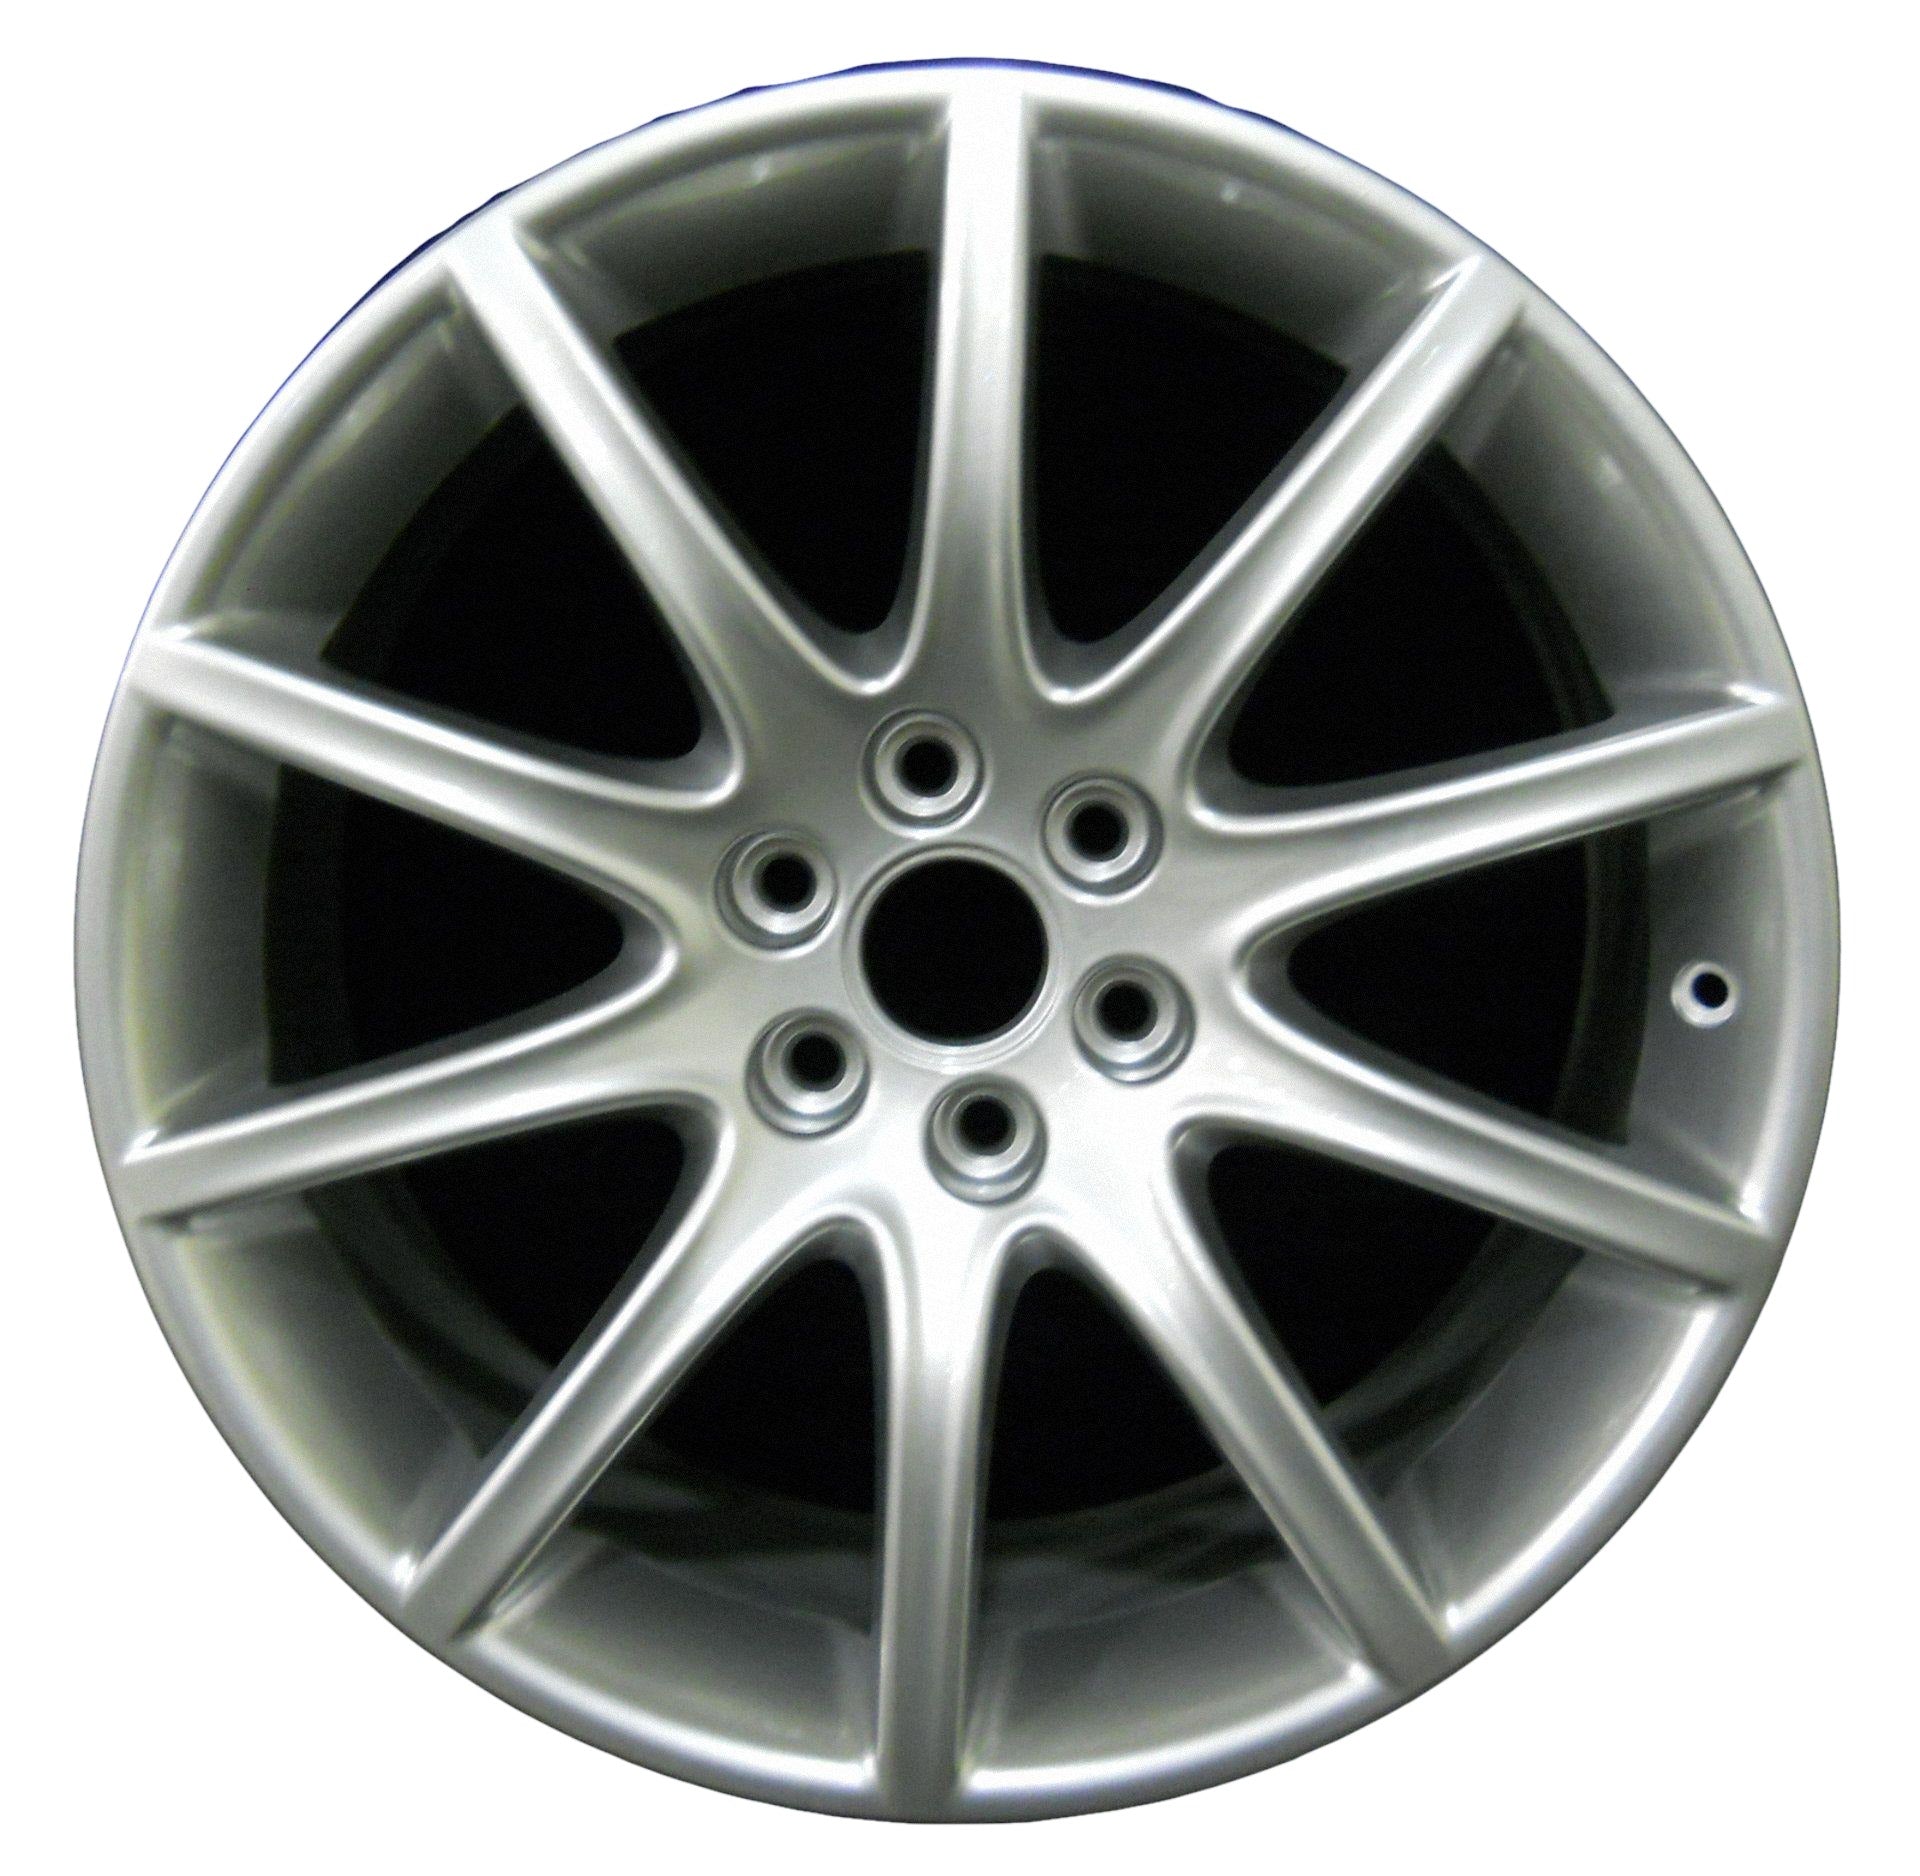 Cadillac CTS  2006, 2007, 2008, 2009 Factory OEM Car Wheel Size 19x9.5 Alloy WAO.4598RE.HYPV1.FF